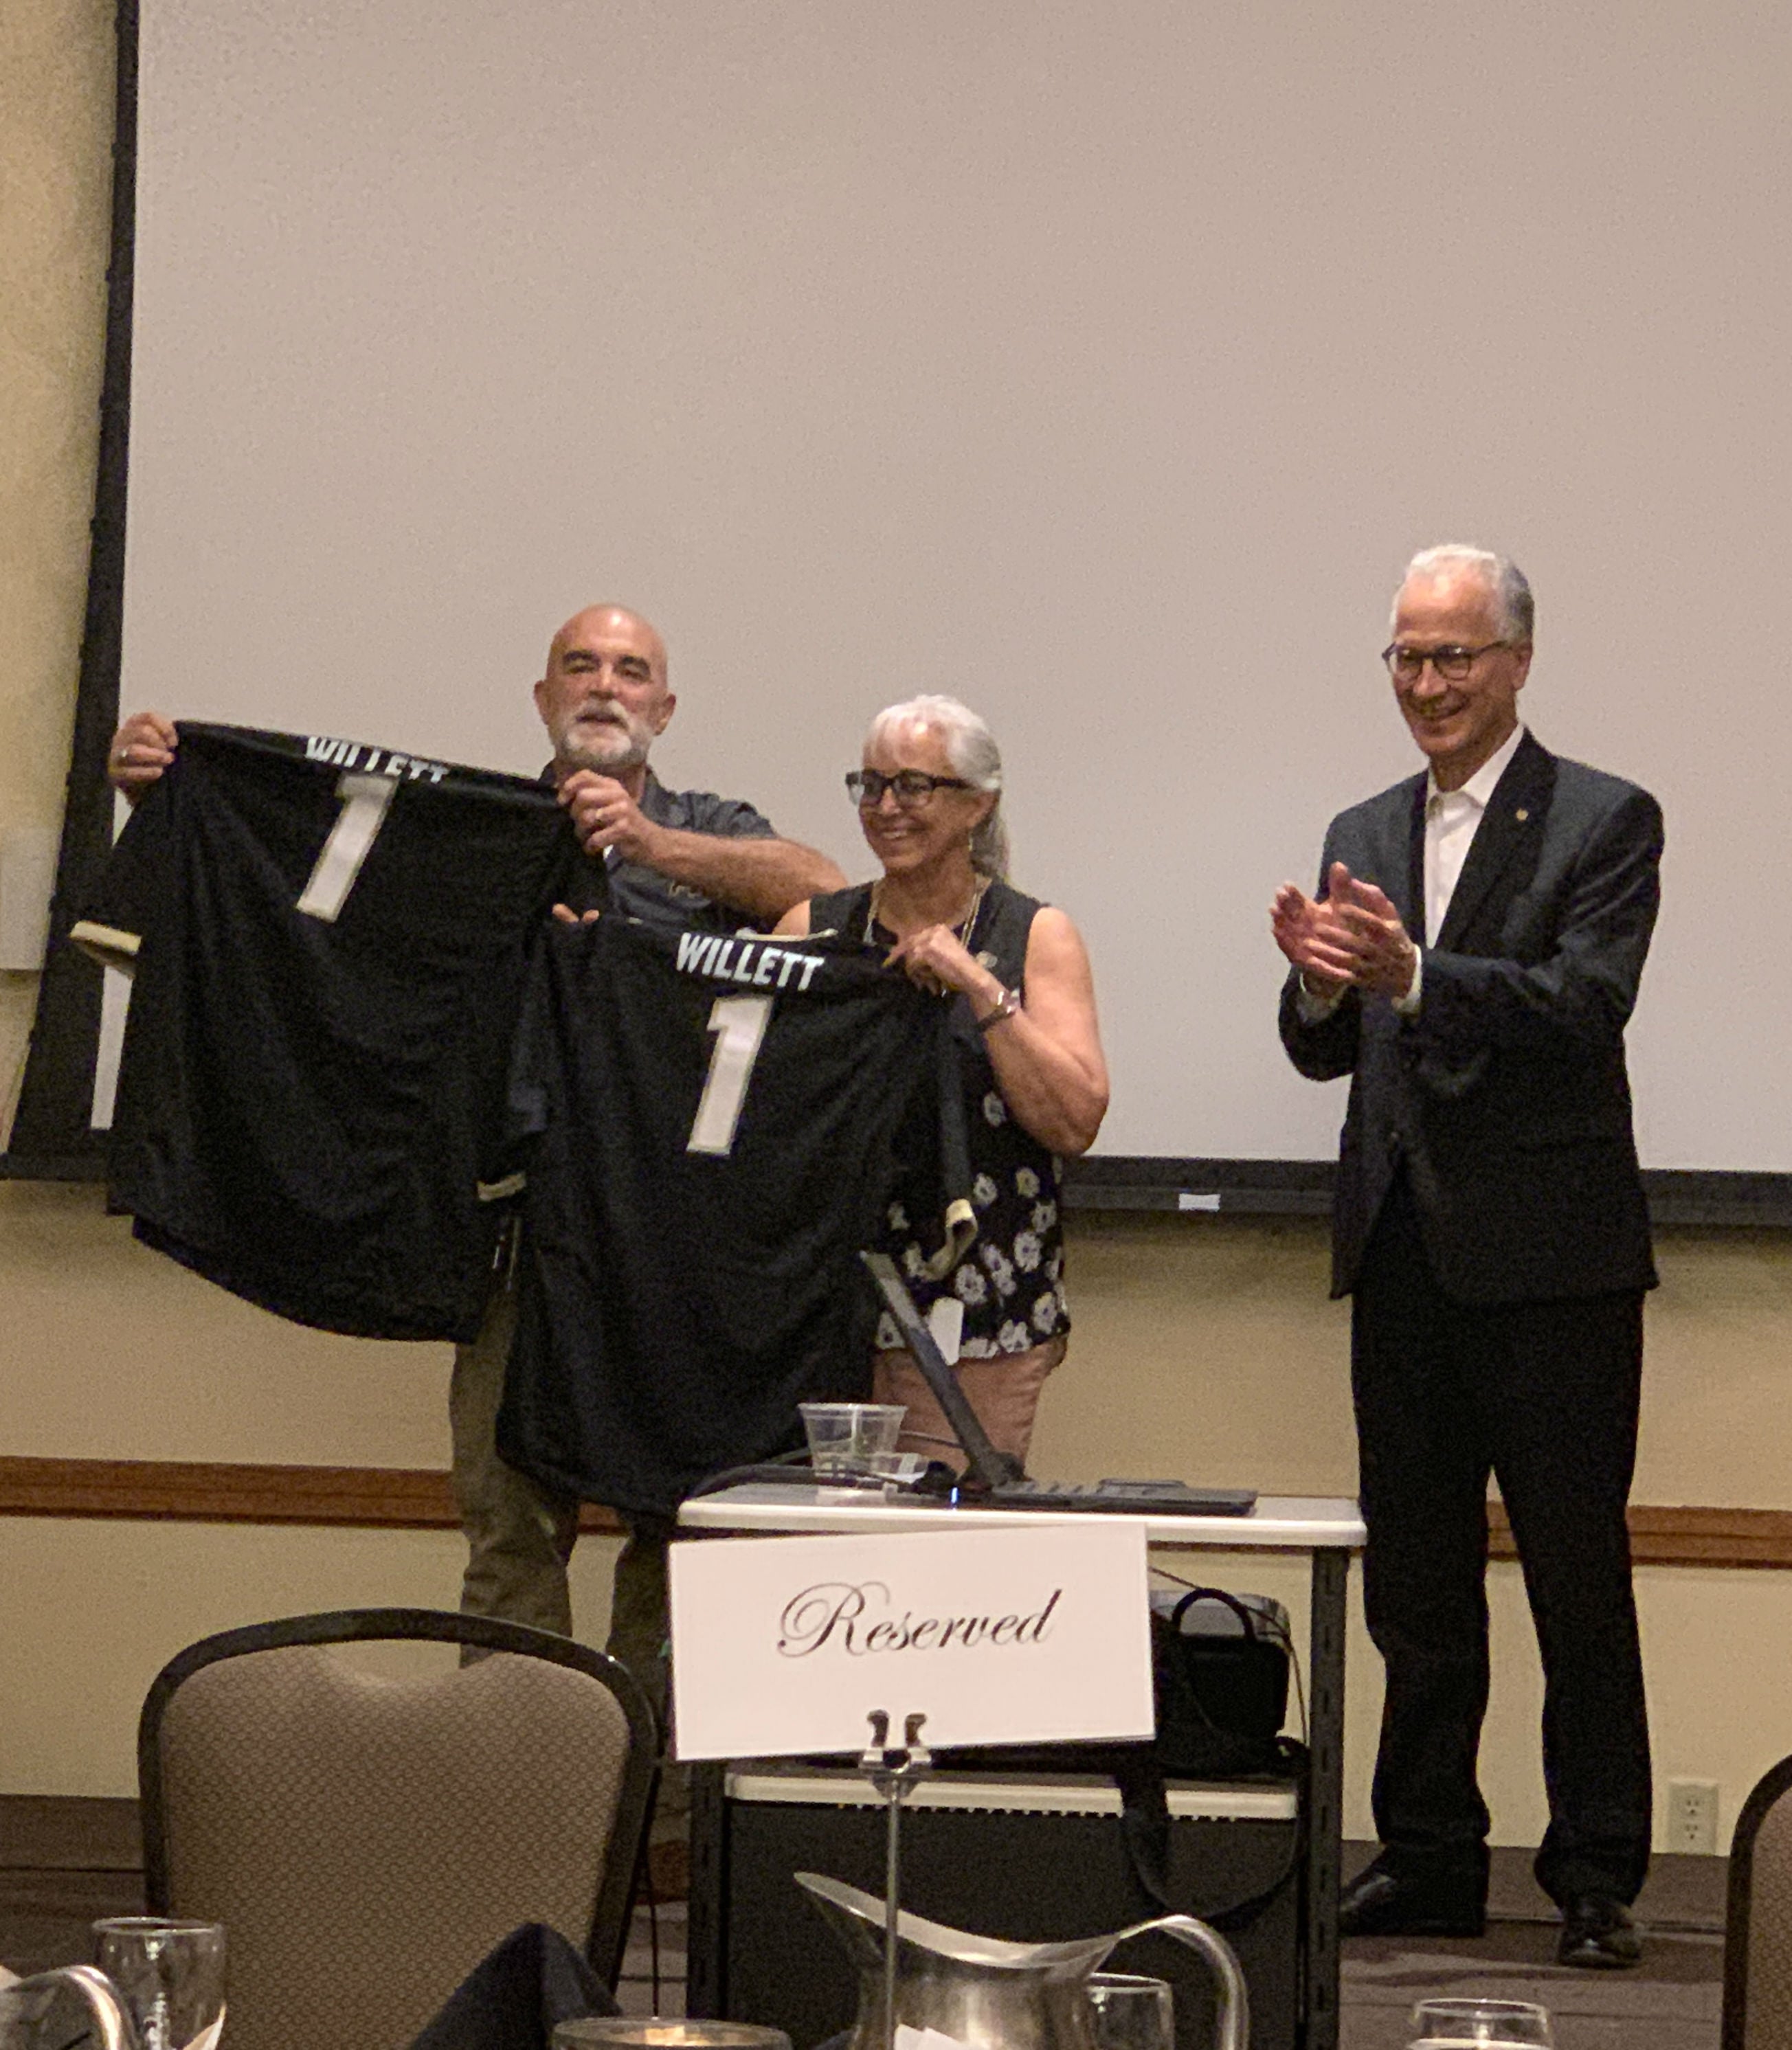 CU Regent Glen Gallegos and President Mark Kennedy presented former State Representative Yeulin Willett (R-Grand Junction) and his wife Rose with CU football jerseys at the event in Grand Junction.  